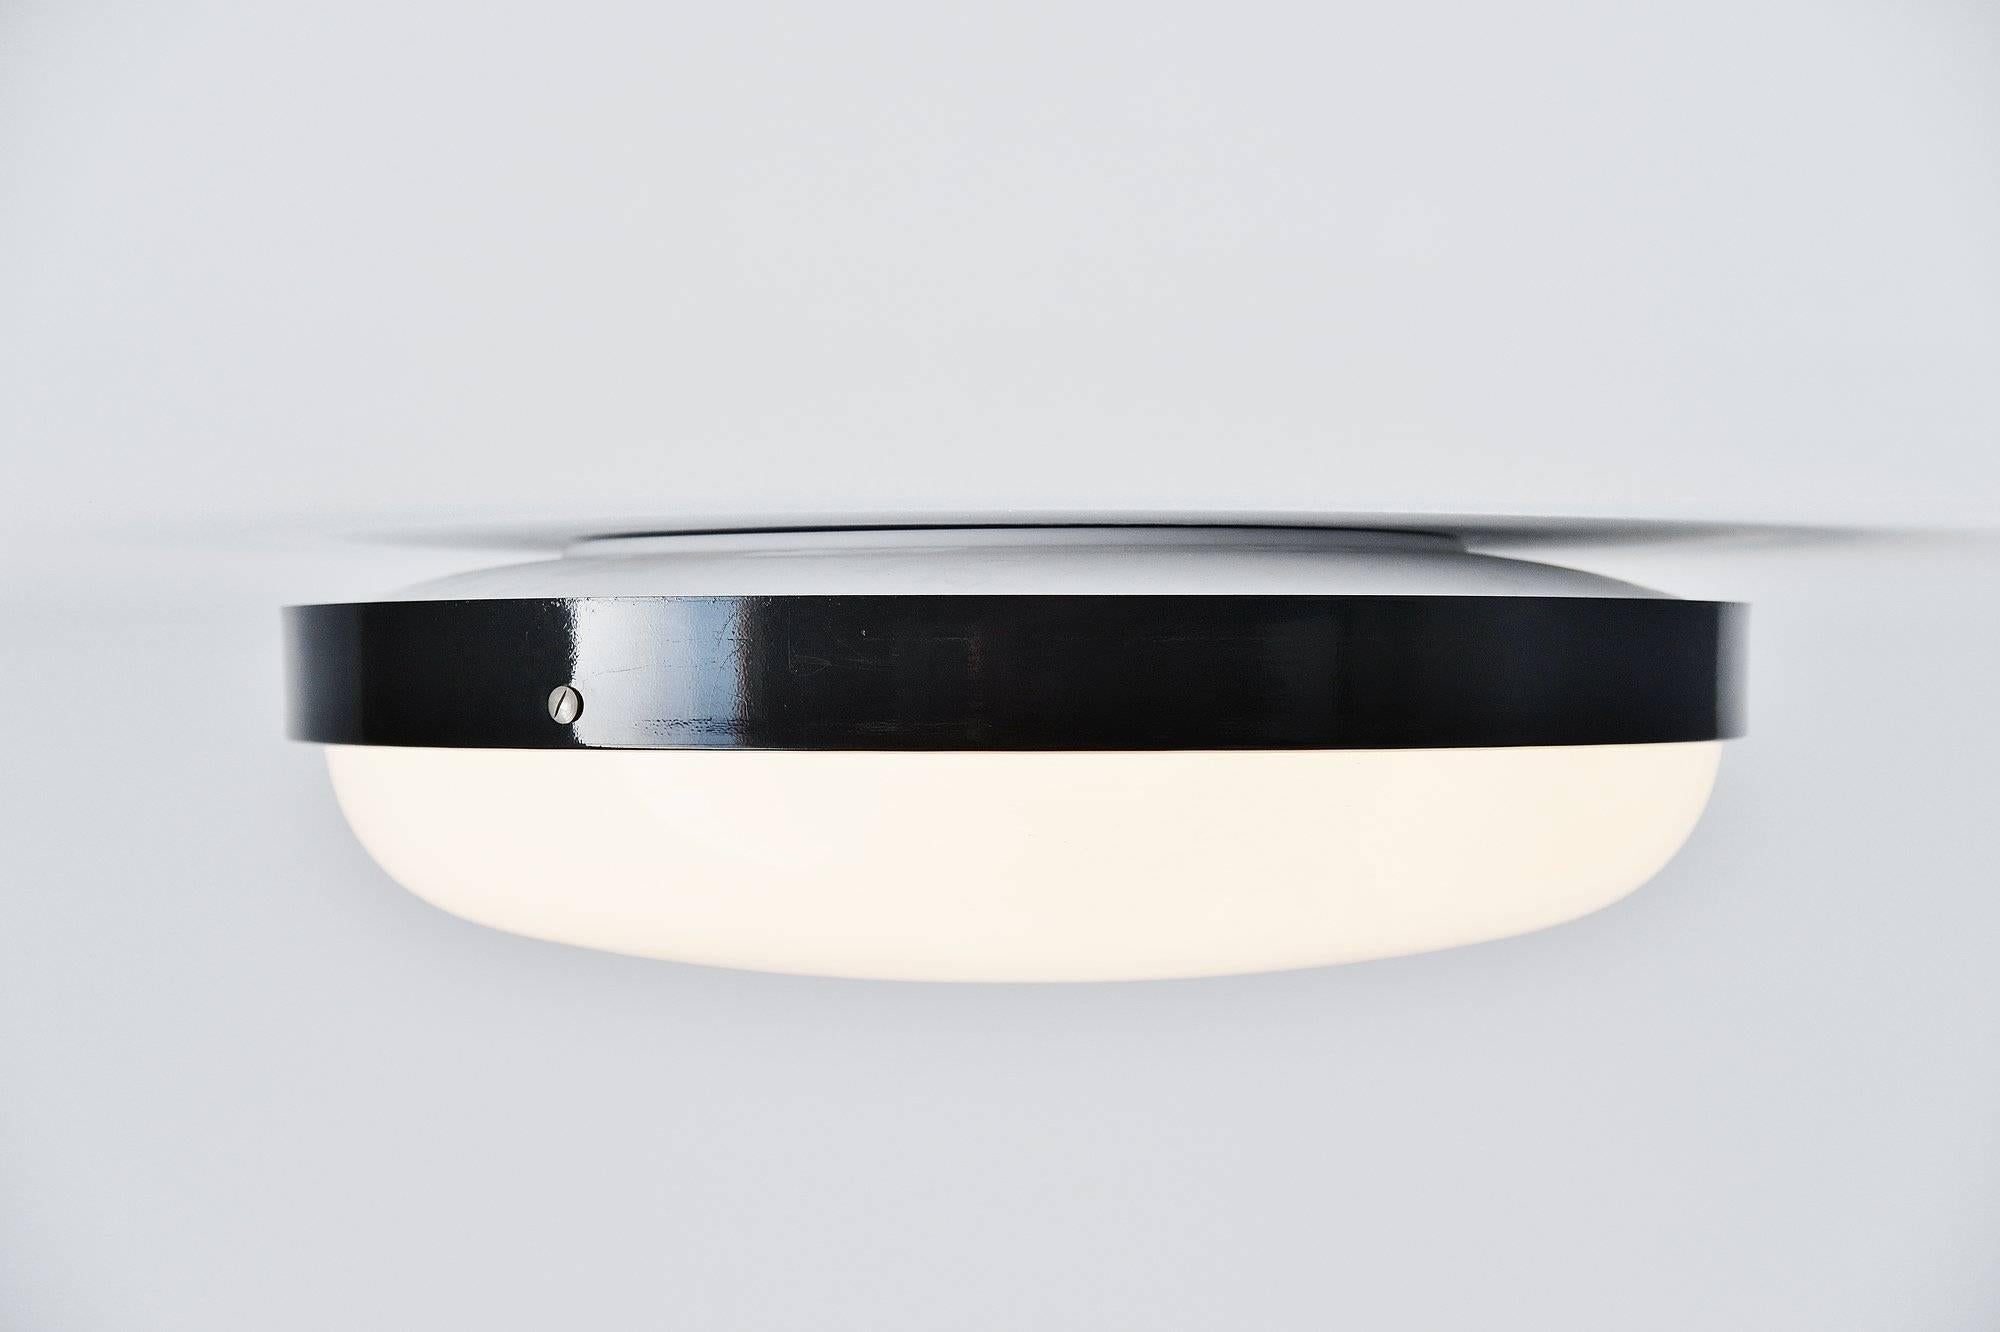 Large ceiling lamp model 3001/4 designed by Gino Sarfatti, manufactured by Arteluce, Italy 1950. This light exists in three parts, a white lacquered frame, with a white plexi shade and a very dark grey aluminum diffuser ring. This lamp is documented